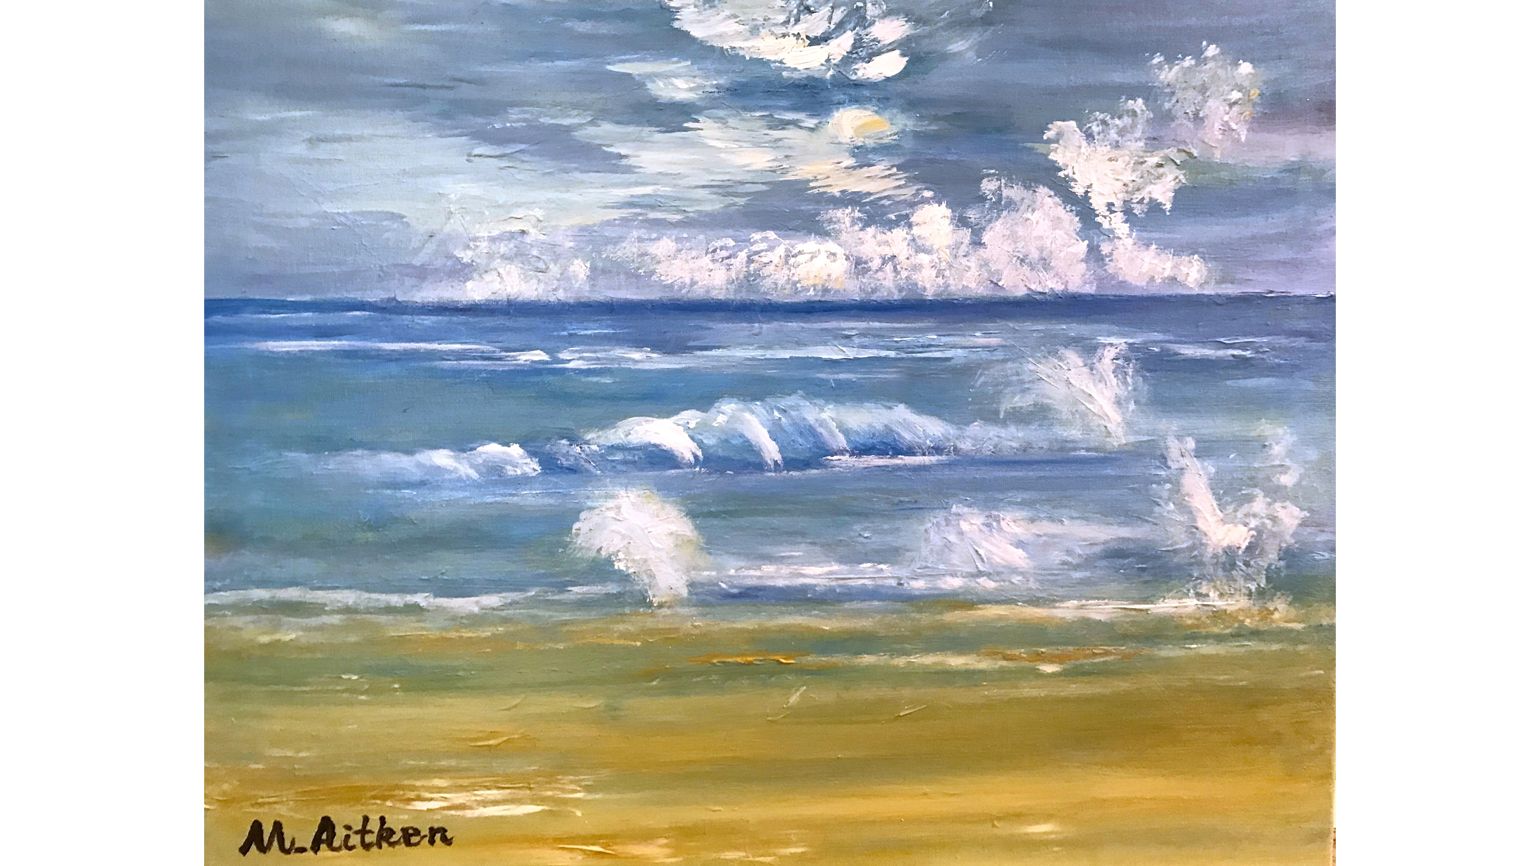 A painting with surprise angels on a beach landscape.